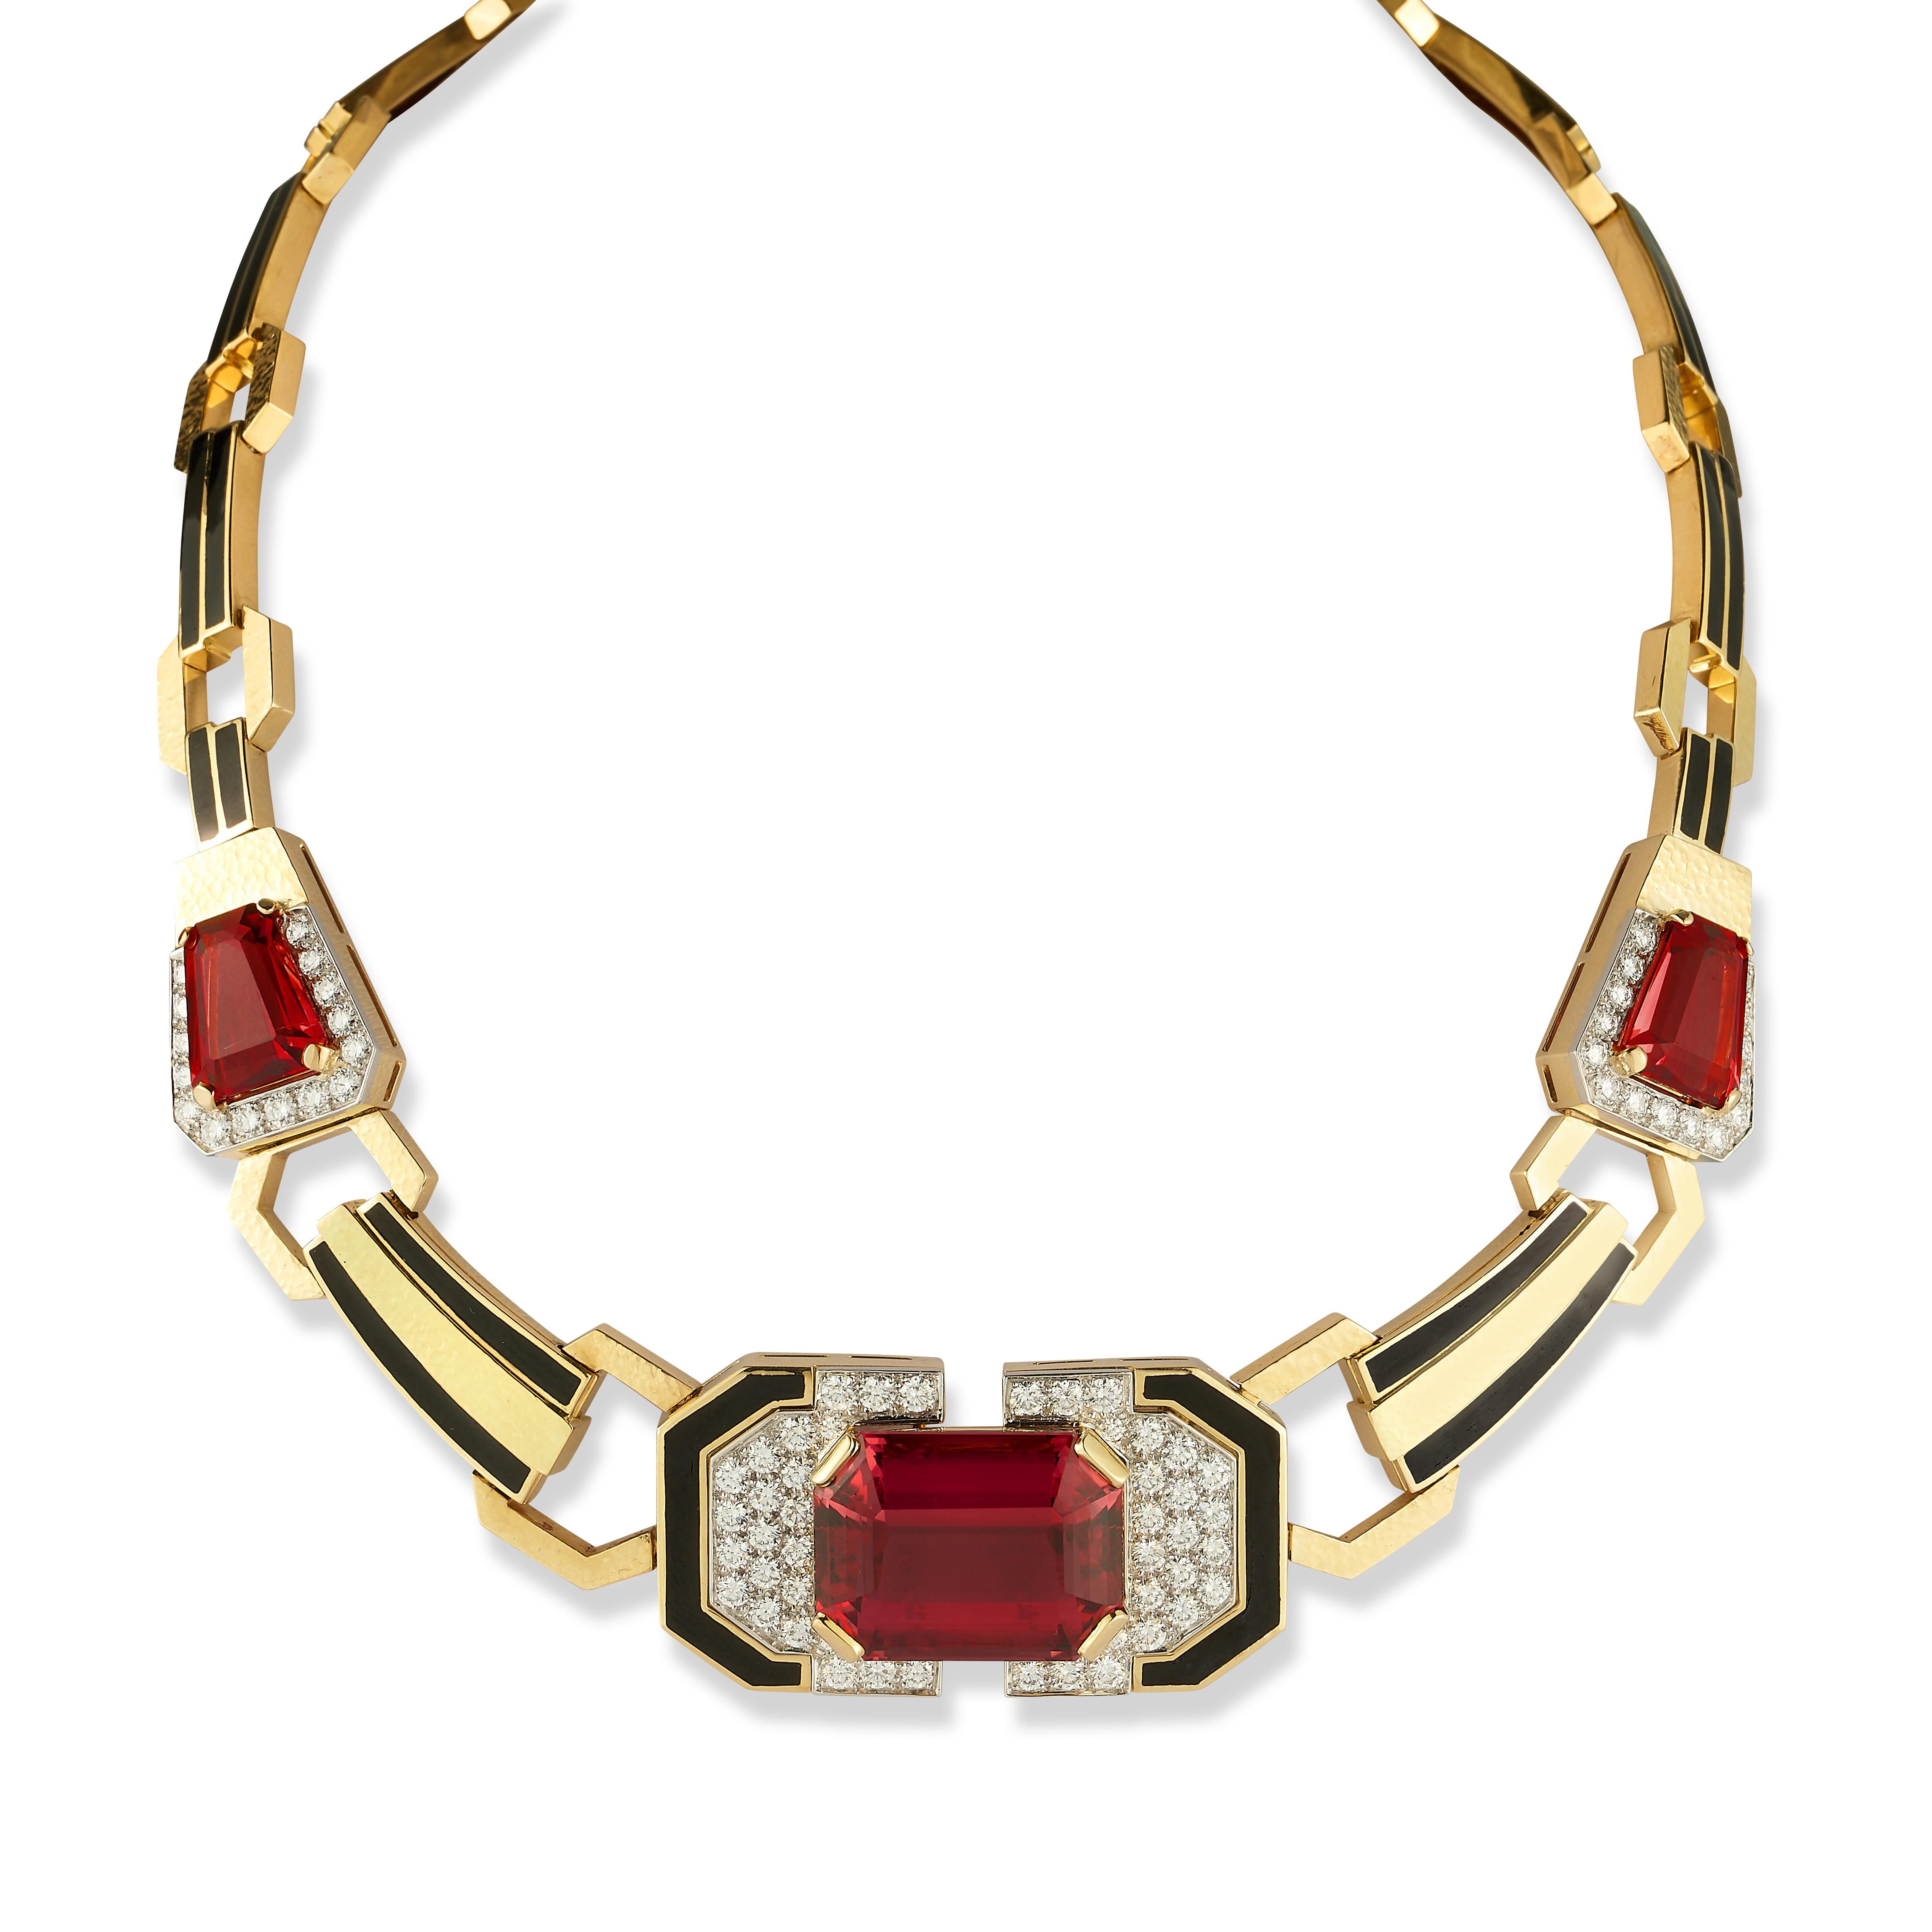 David Webb Rubellite Tourmaline and Enamel Necklace

A hammered gold and black enamel necklace showcasing one emerald-cut and two trapezoid-shaped rubellites. Accented by round-cut diamonds..

Rubellite weight: 42.26 carats 

Diamond weight: 4.84